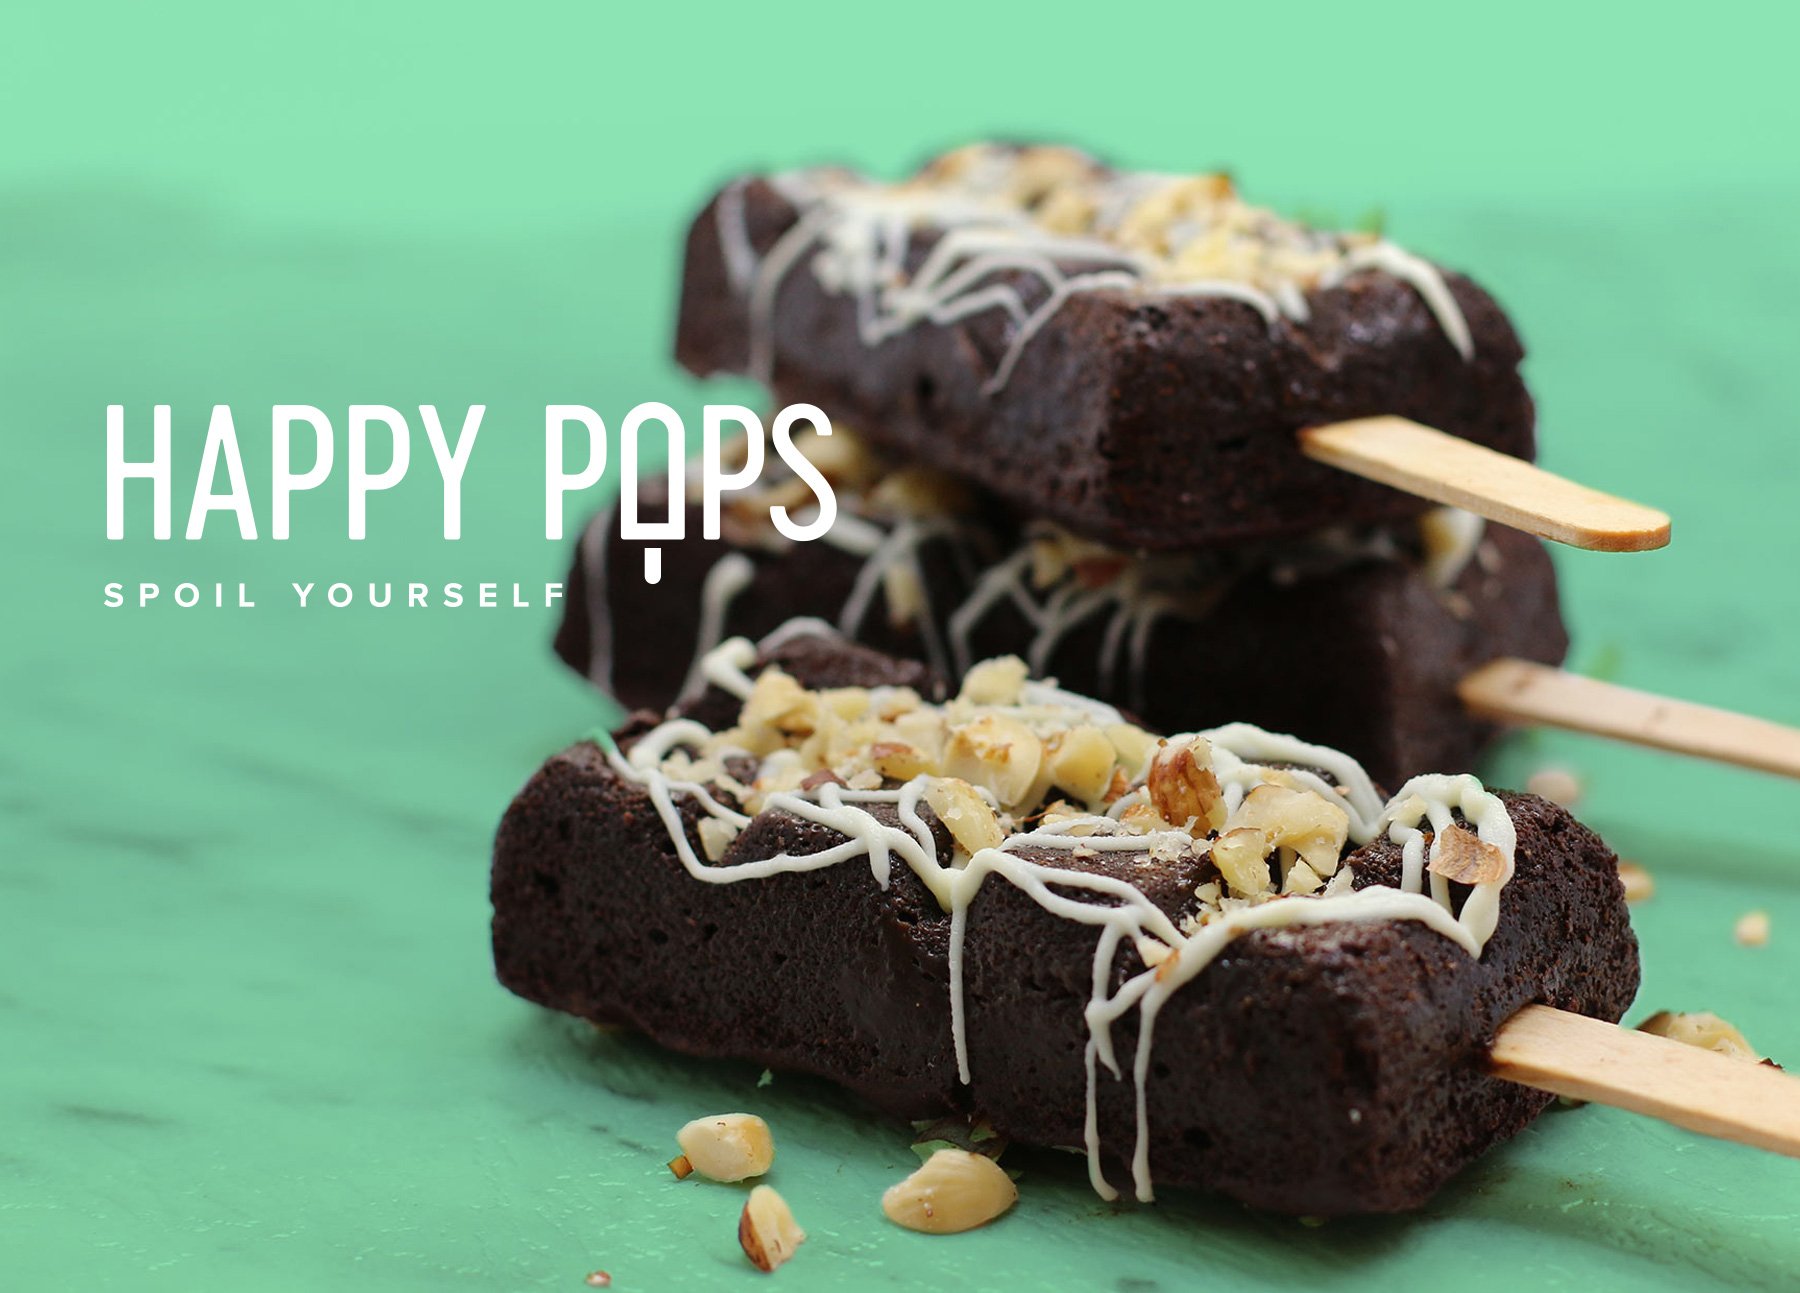 led-by-design-happypops-feature5